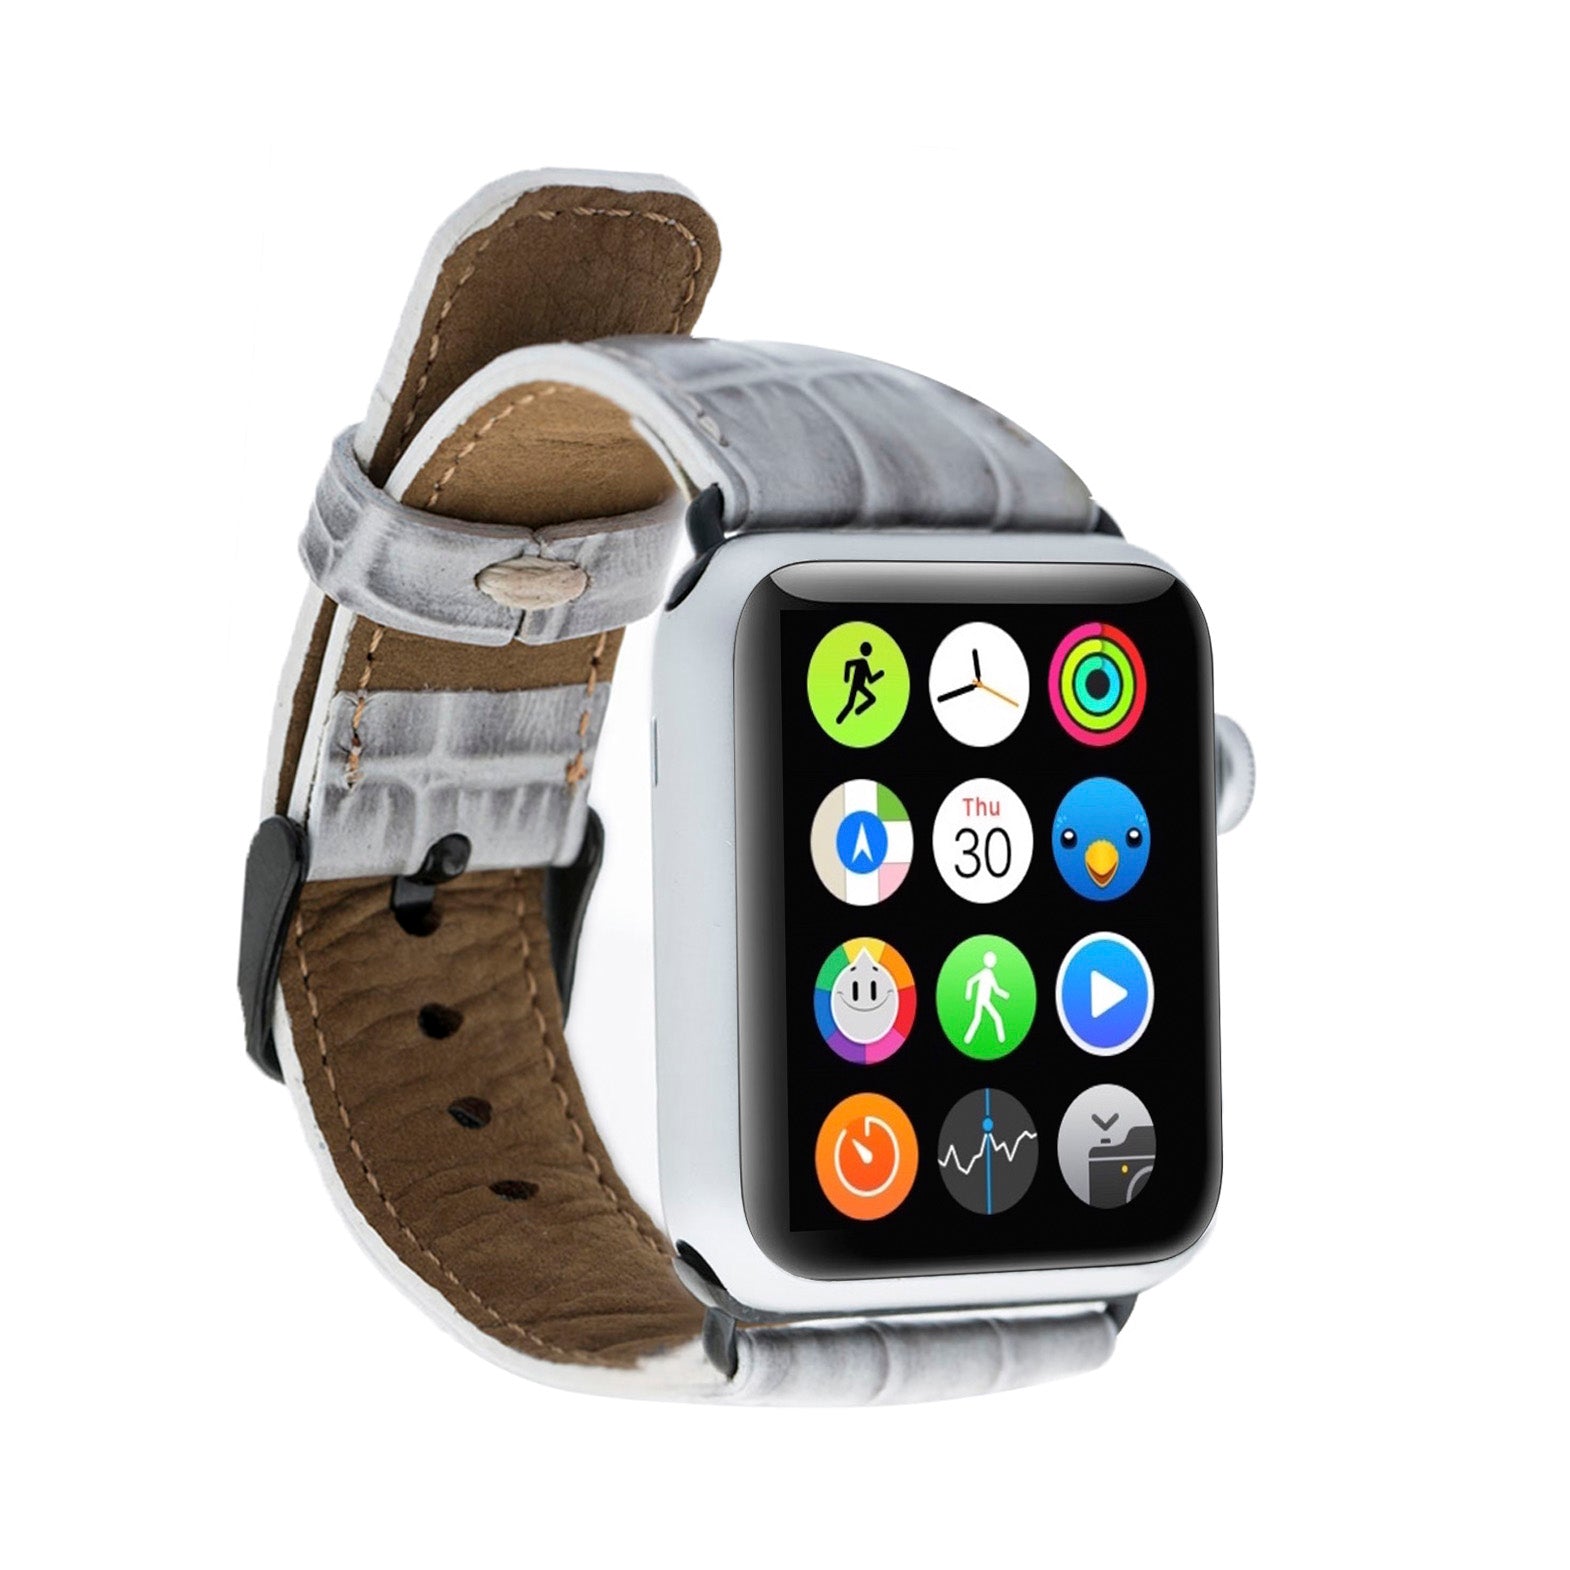 Full Grain Leather Band for Apple Watch - GRAY - saracleather